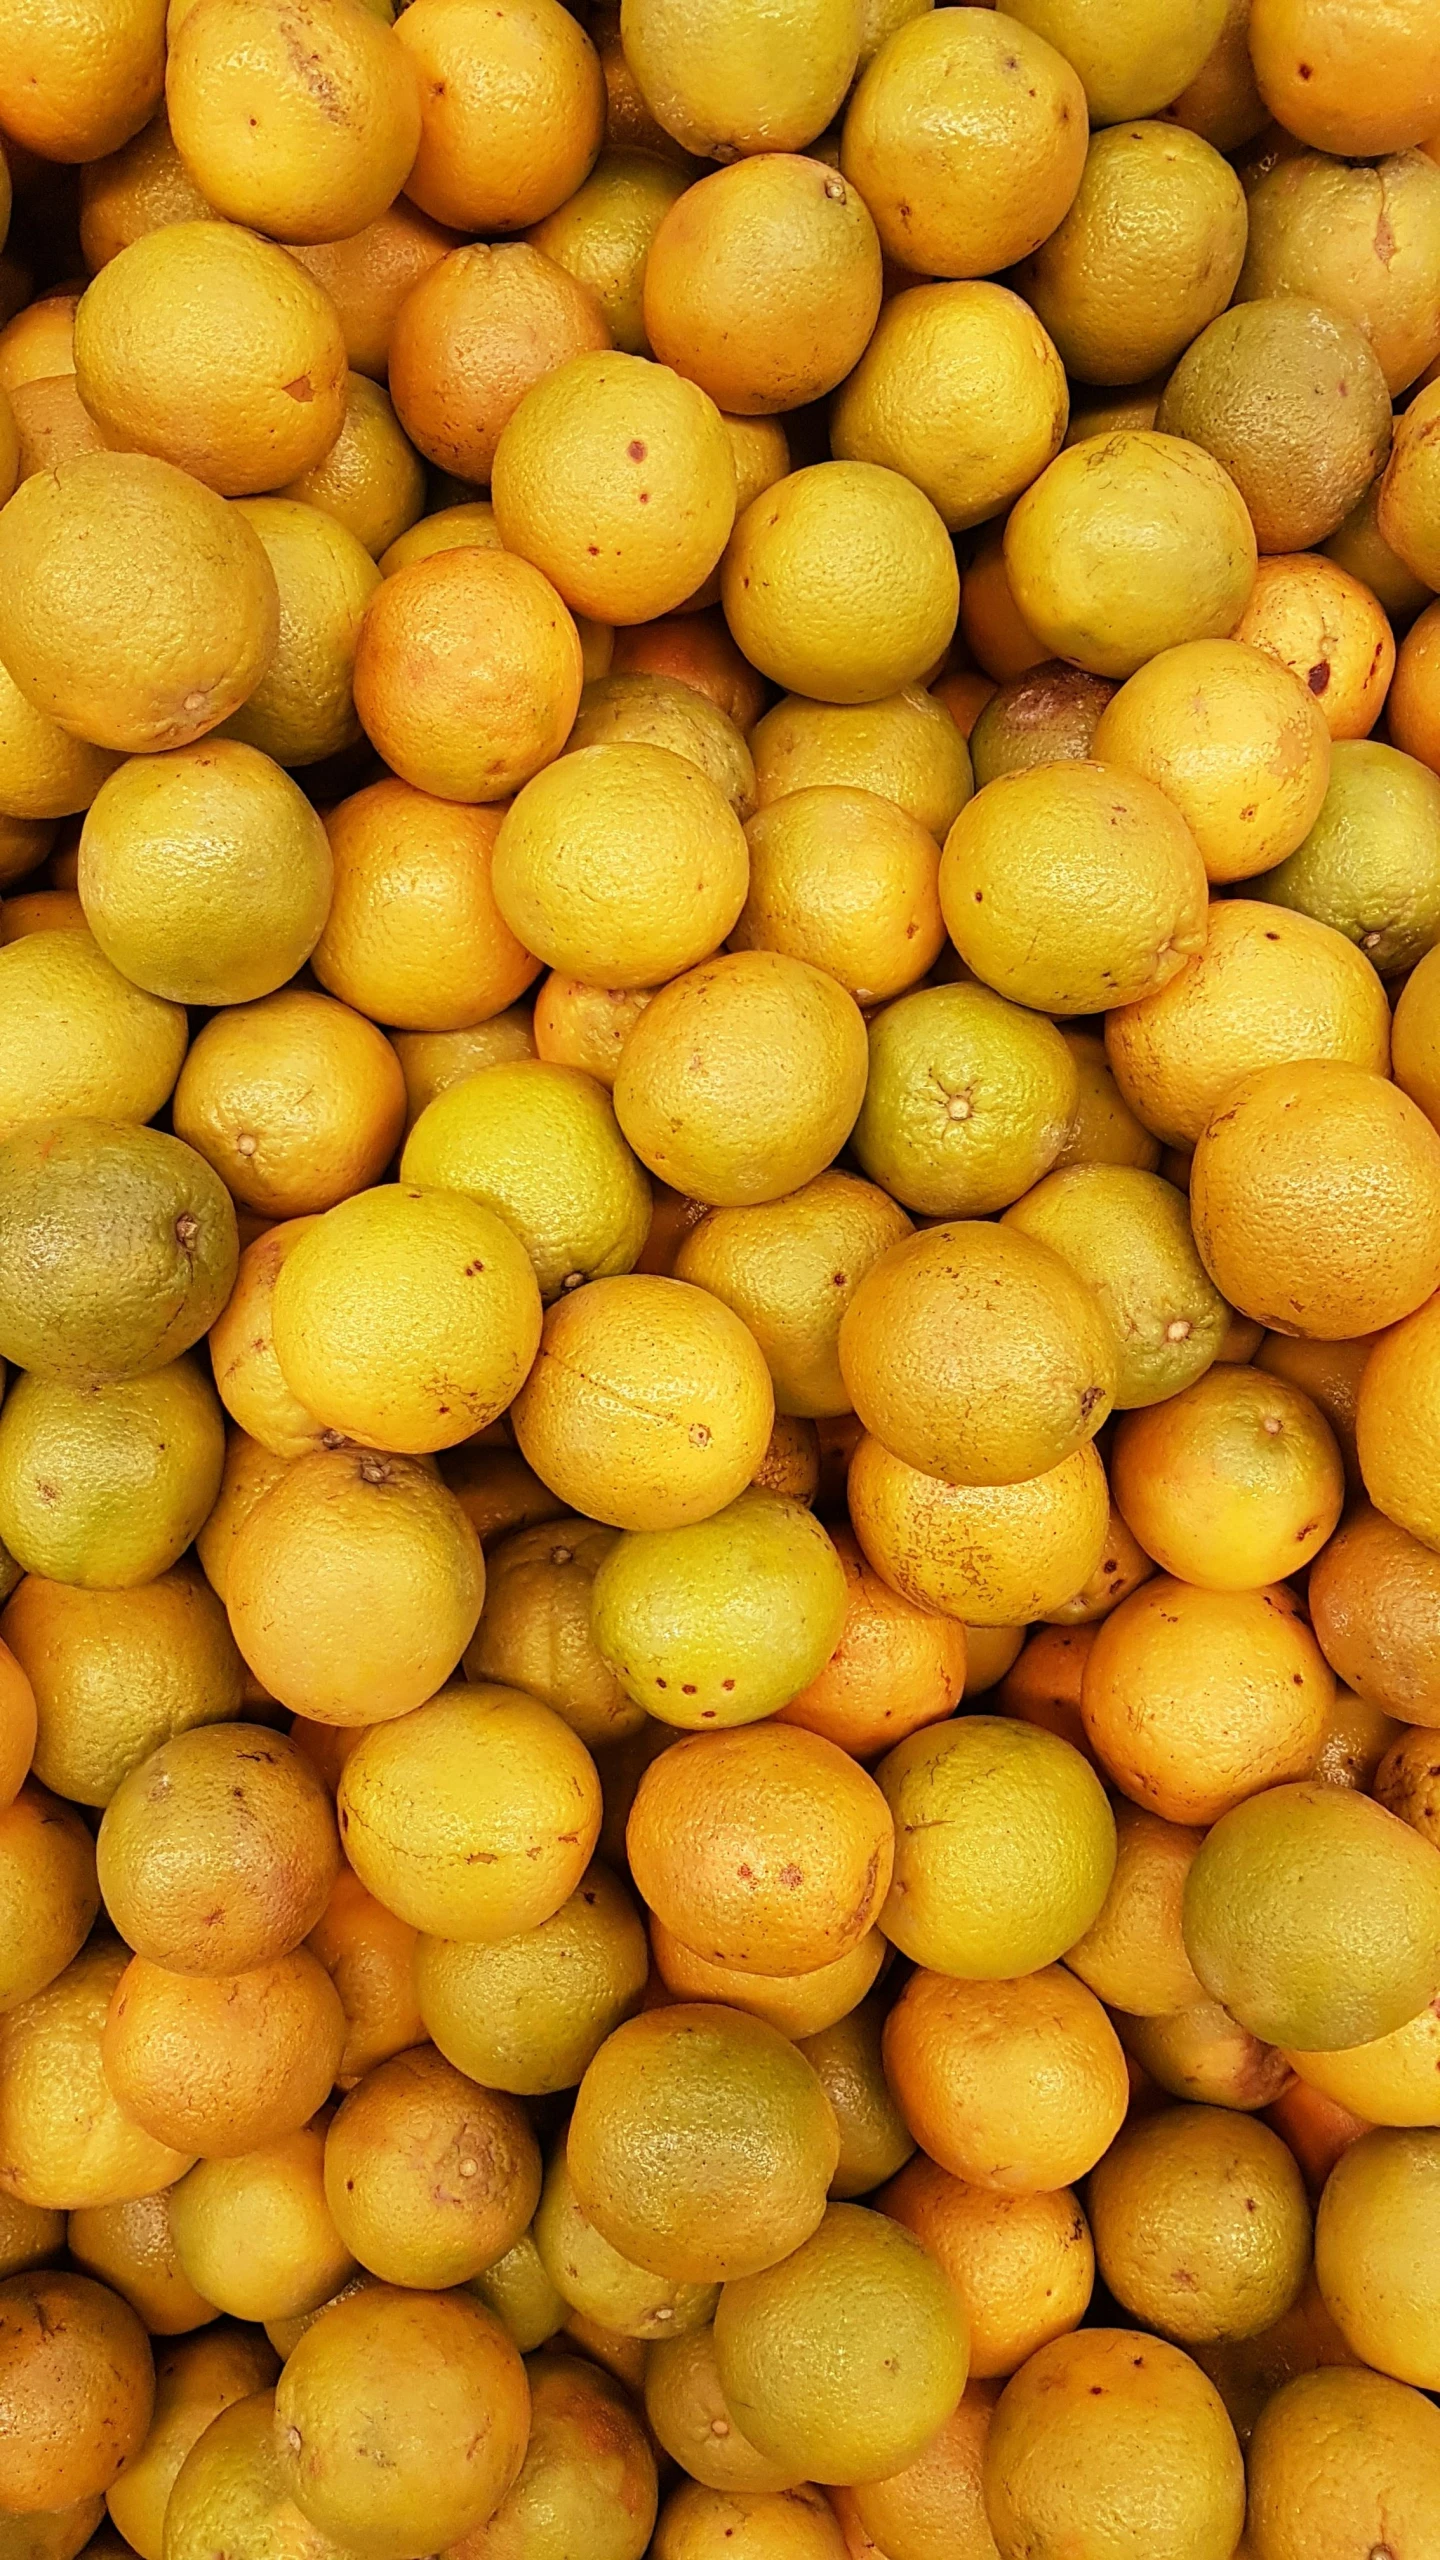 lemons and lemons are piled up in a large container